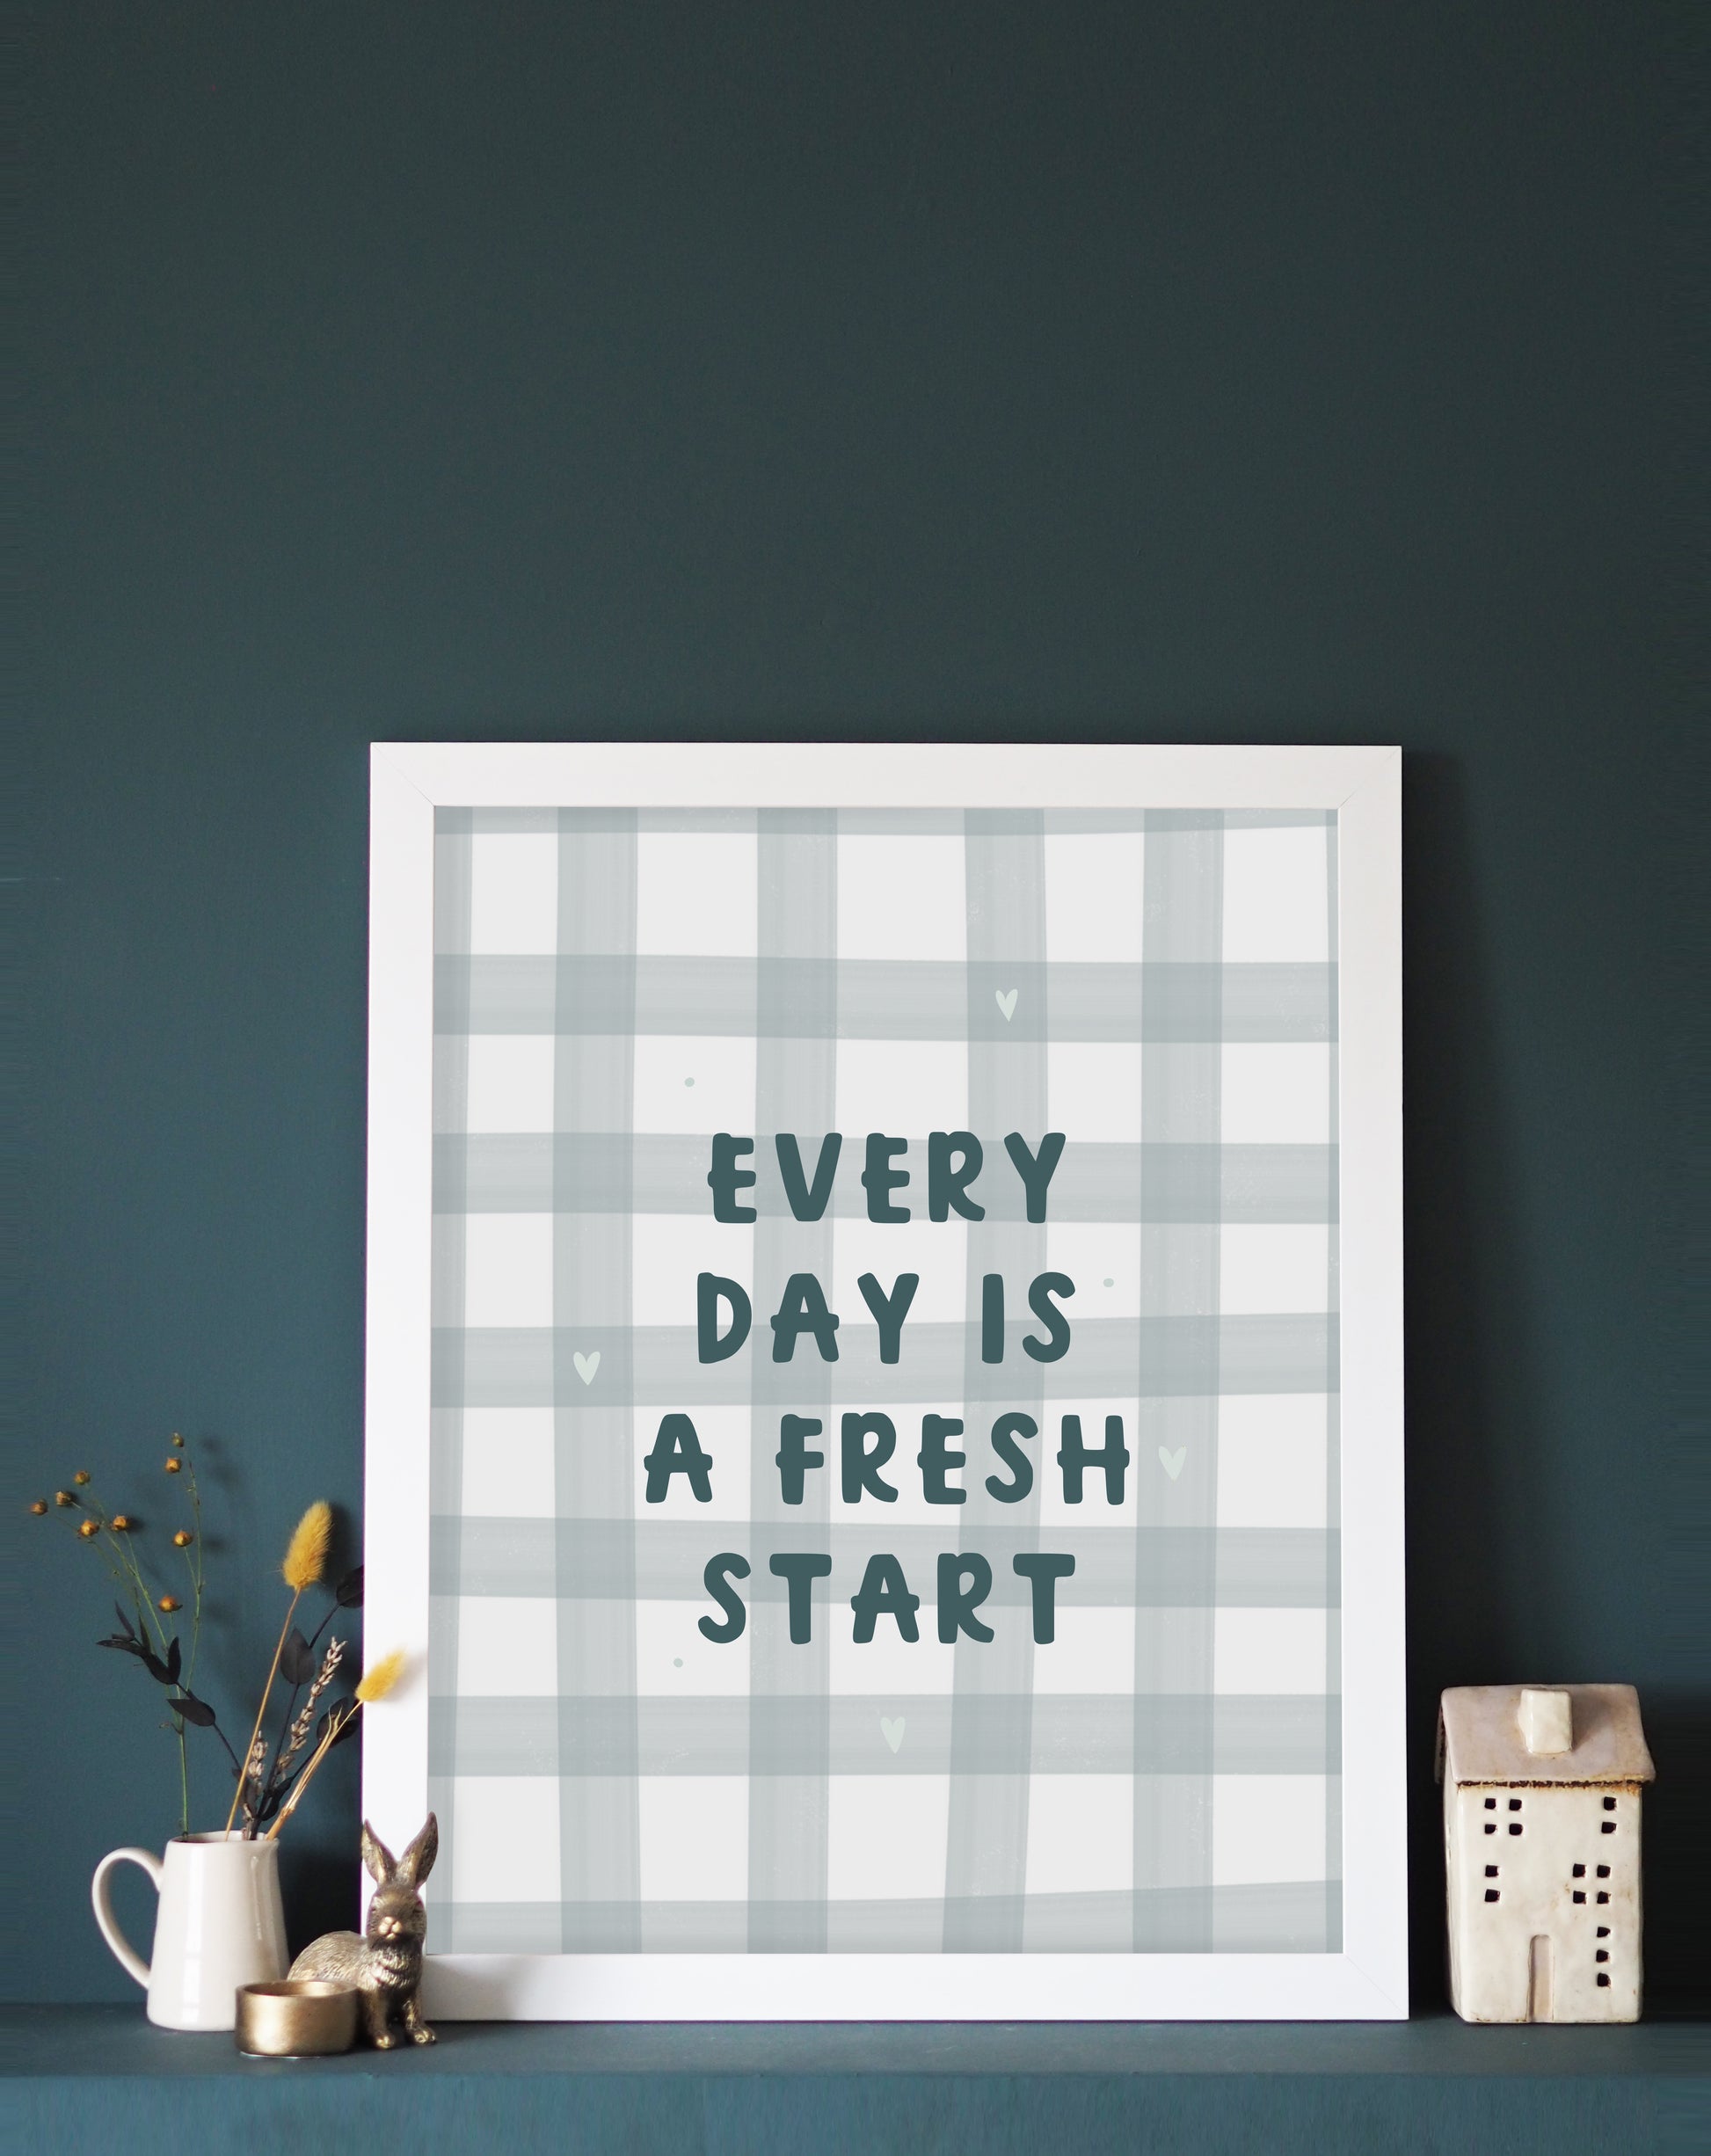 Every day is a fresh start motivational print by Abbie Imagine